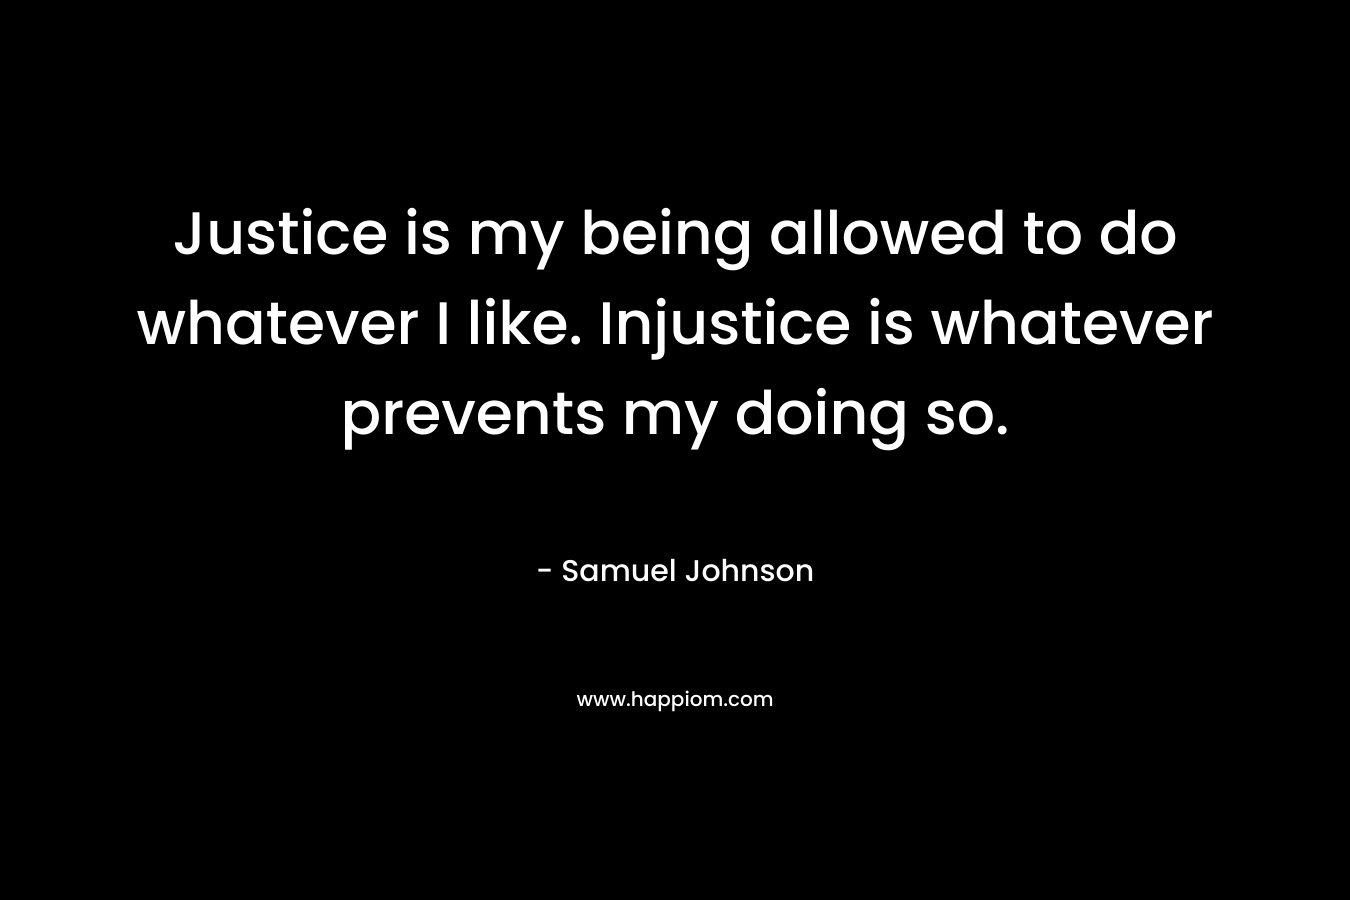 Justice is my being allowed to do whatever I like. Injustice is whatever prevents my doing so. – Samuel Johnson